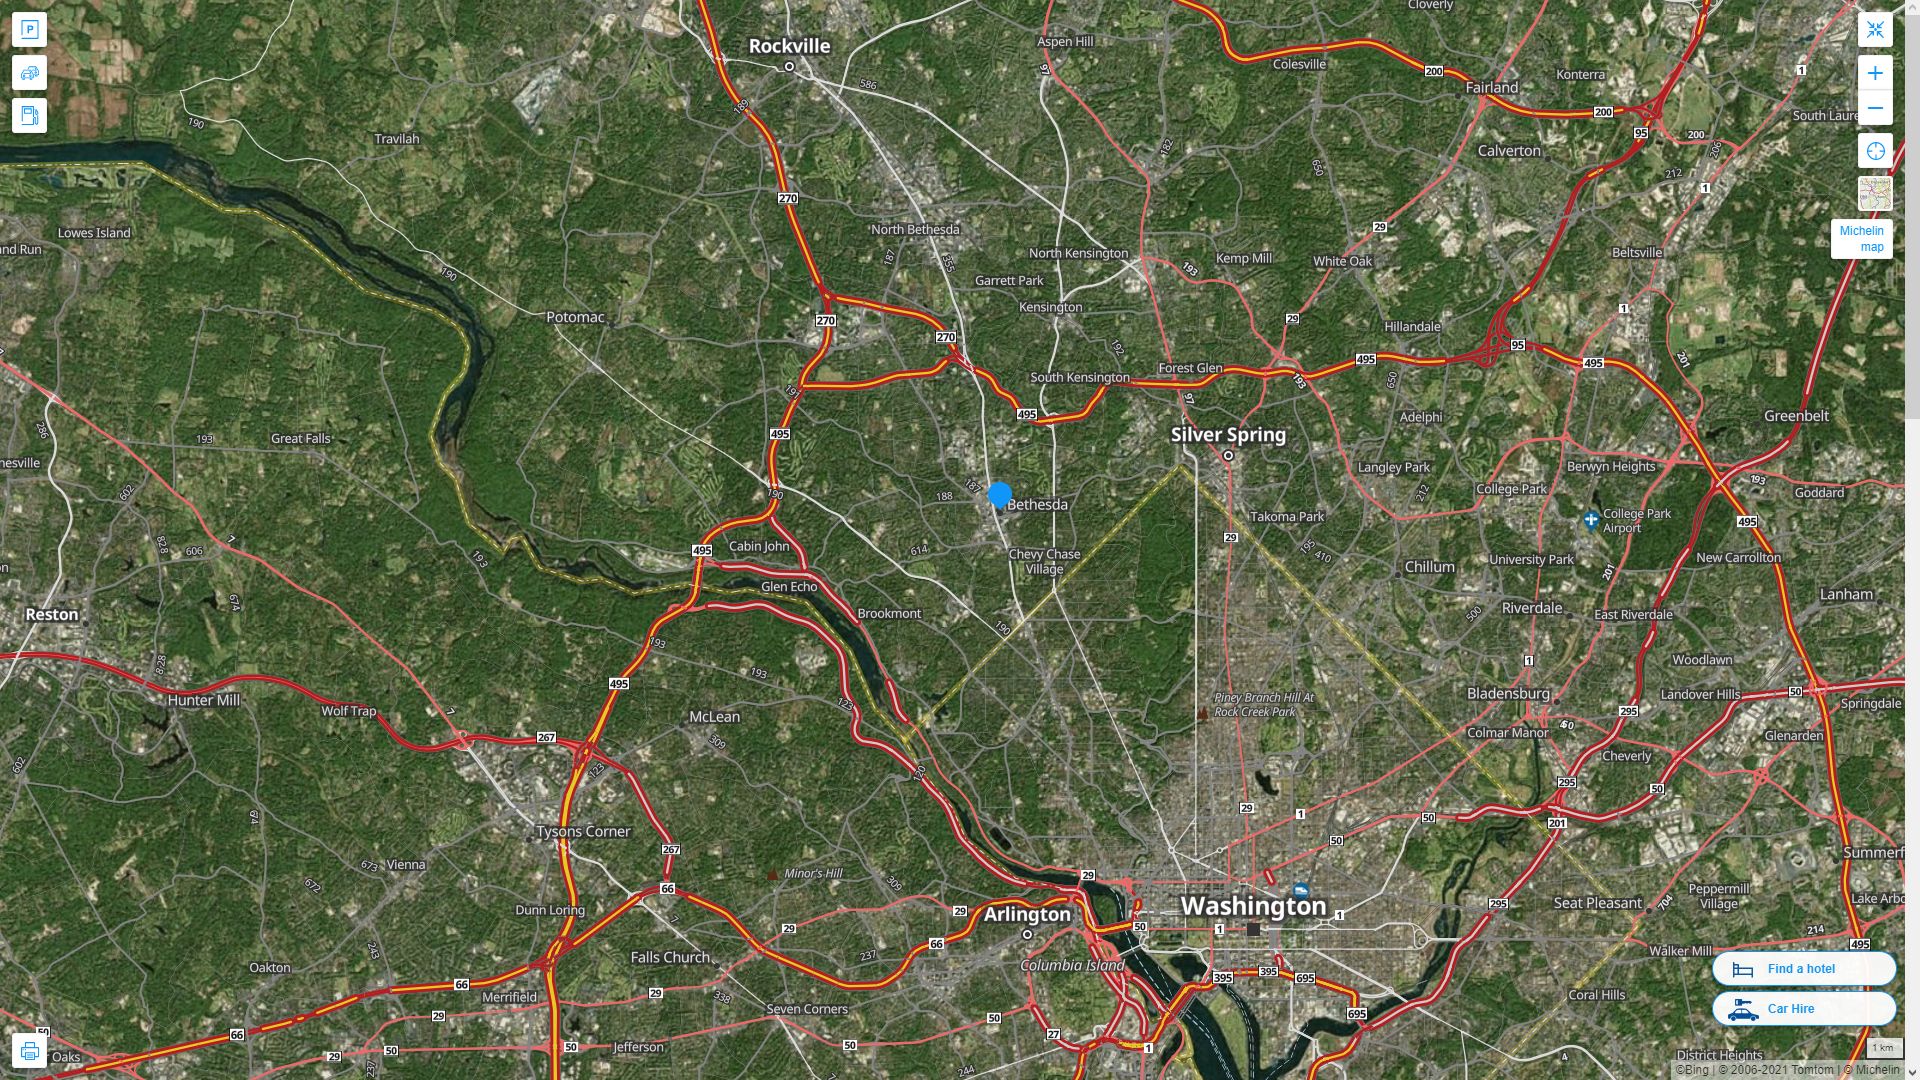 Bethesda Maryland Highway and Road Map with Satellite View